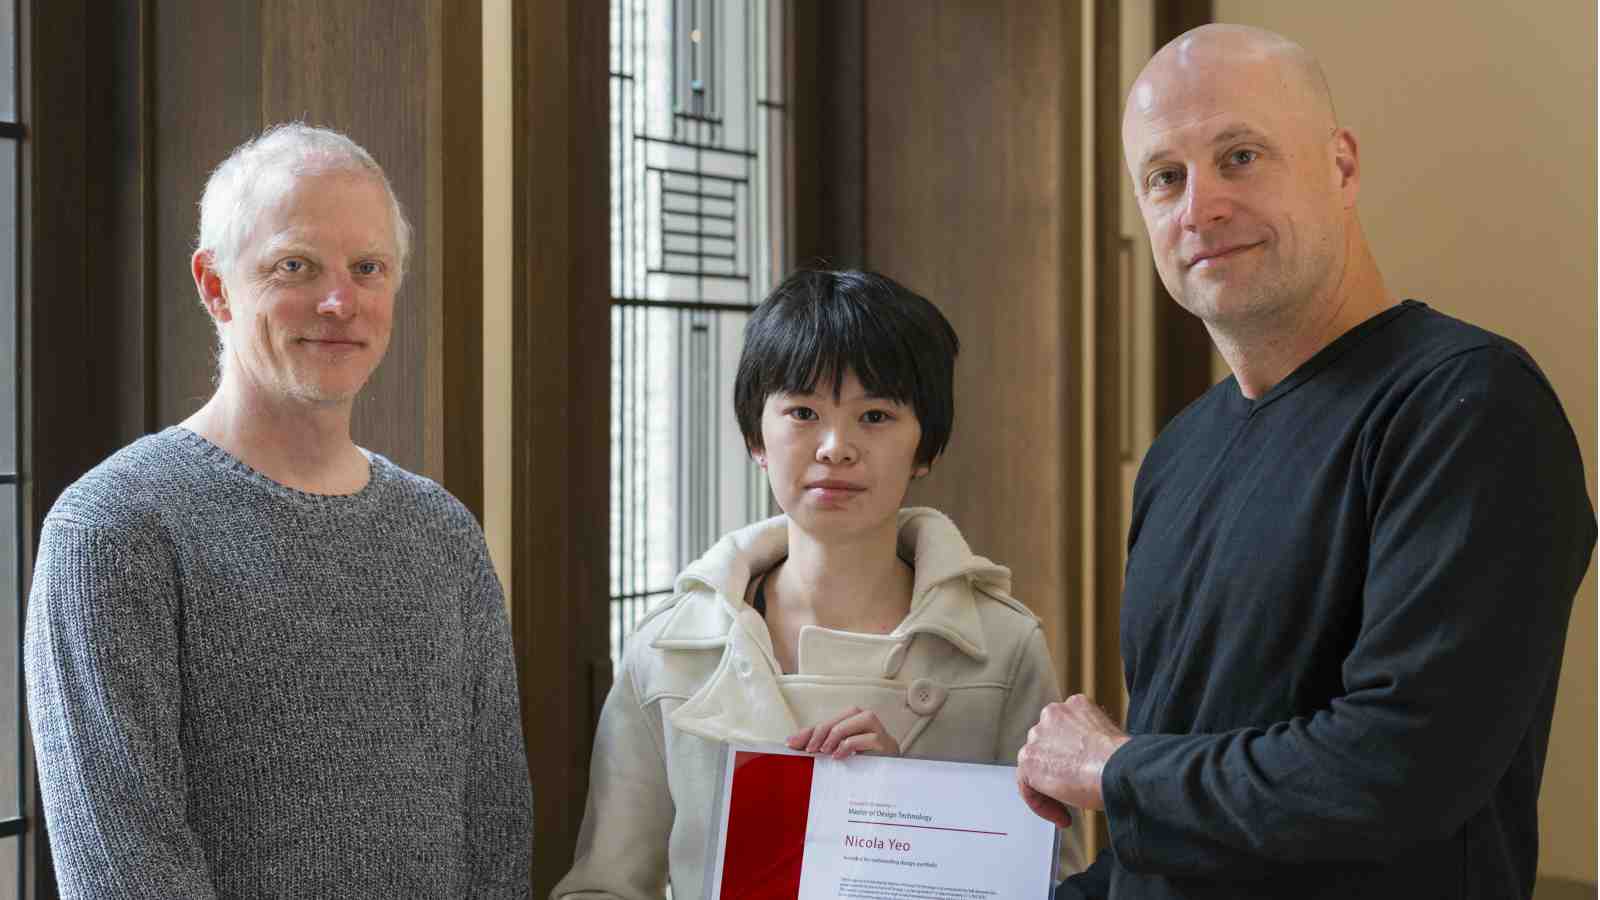 Doug Easterley handing Nicola Yeo a certificate for her scholarship, Kevin Romond stands to the left.